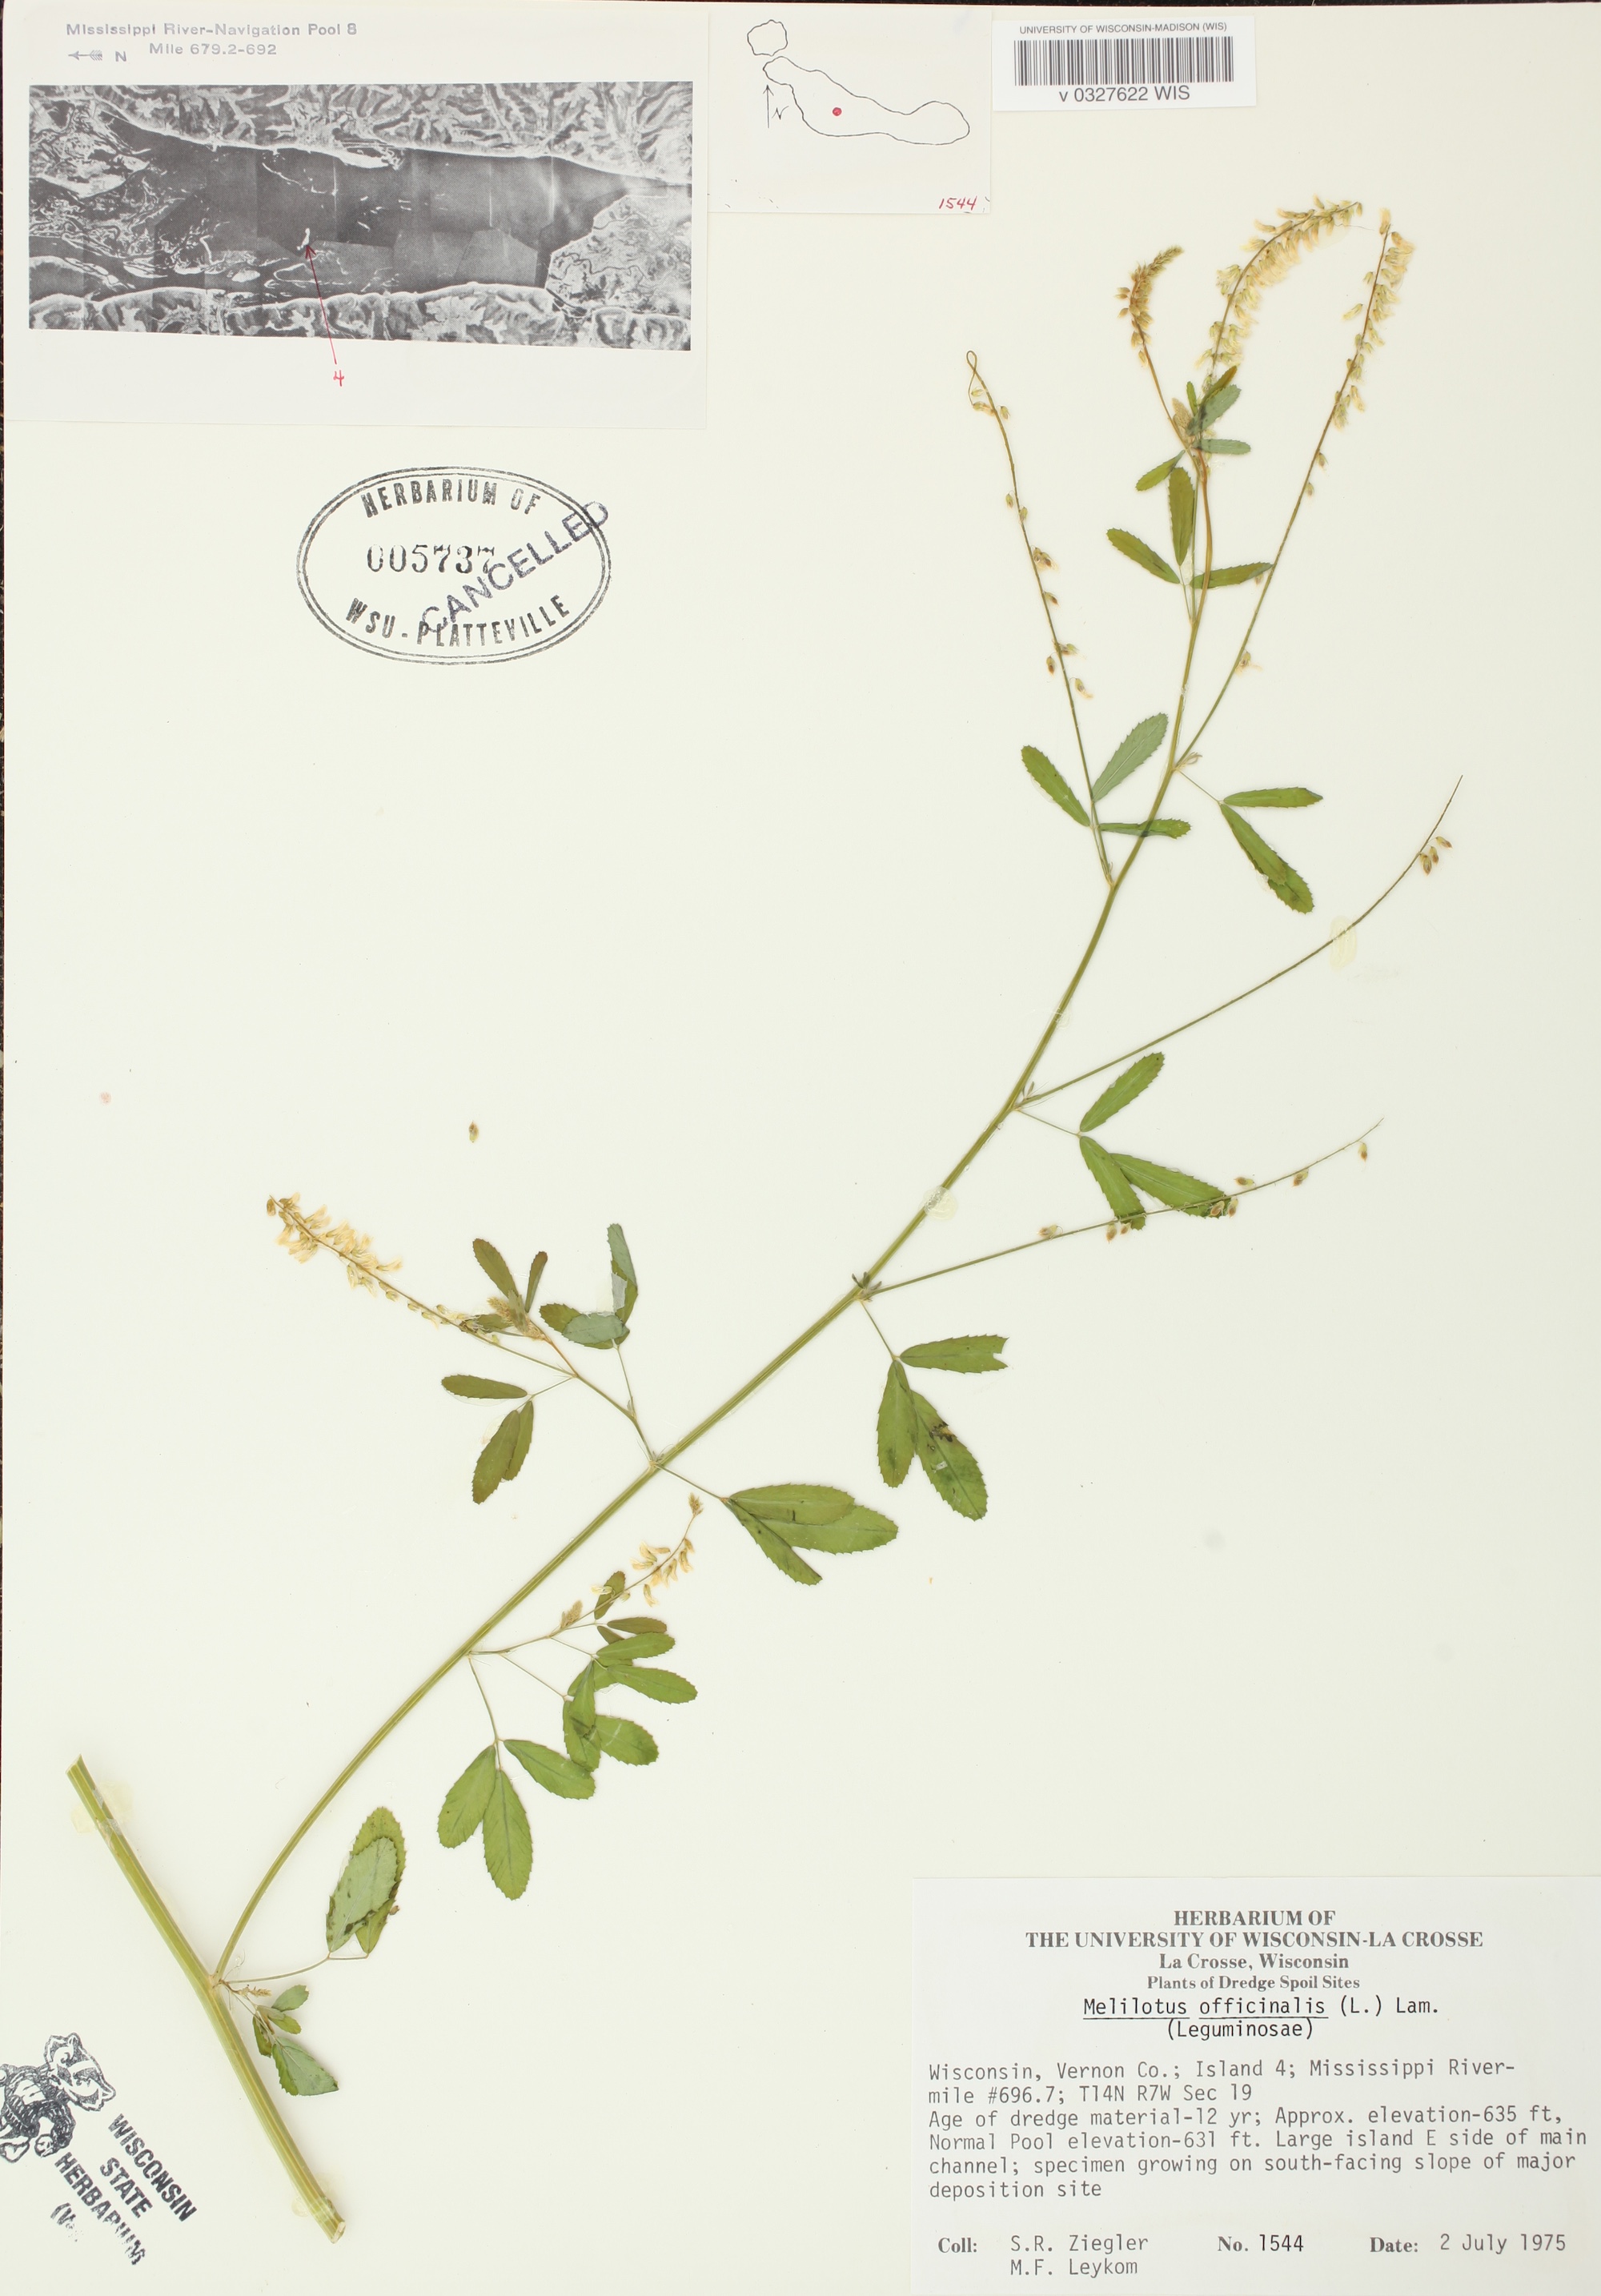 Yellow Sweet Clover specimen collected on an island in the Mississippi River in Vernon County Wisconsin on July 2, 1975.